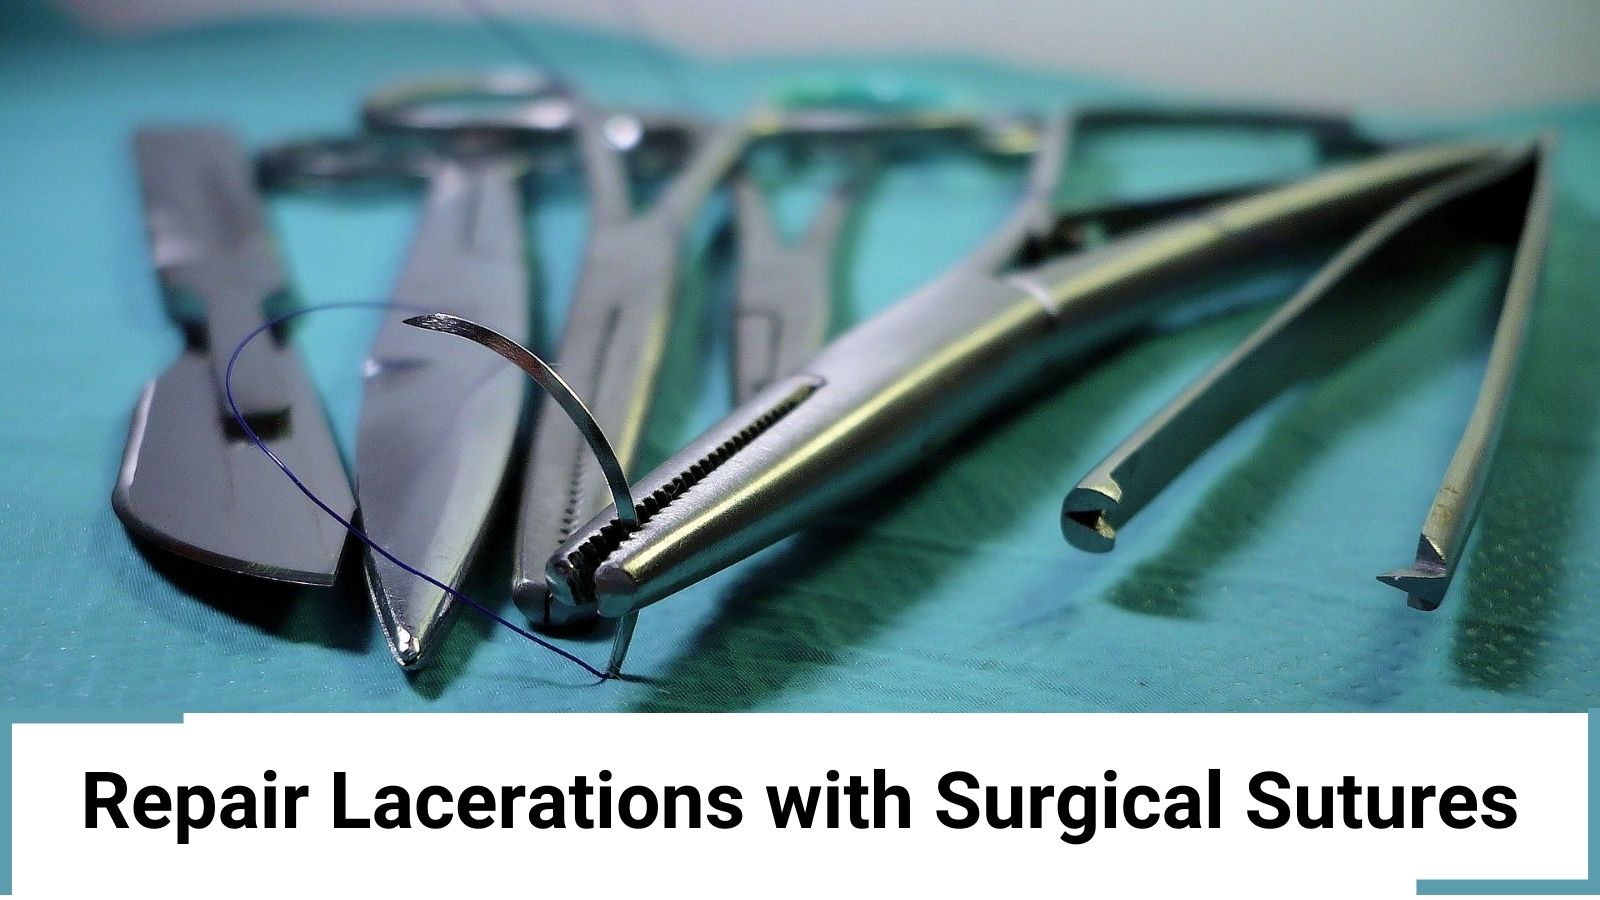 Repair Lacerations with Surgical Sutures